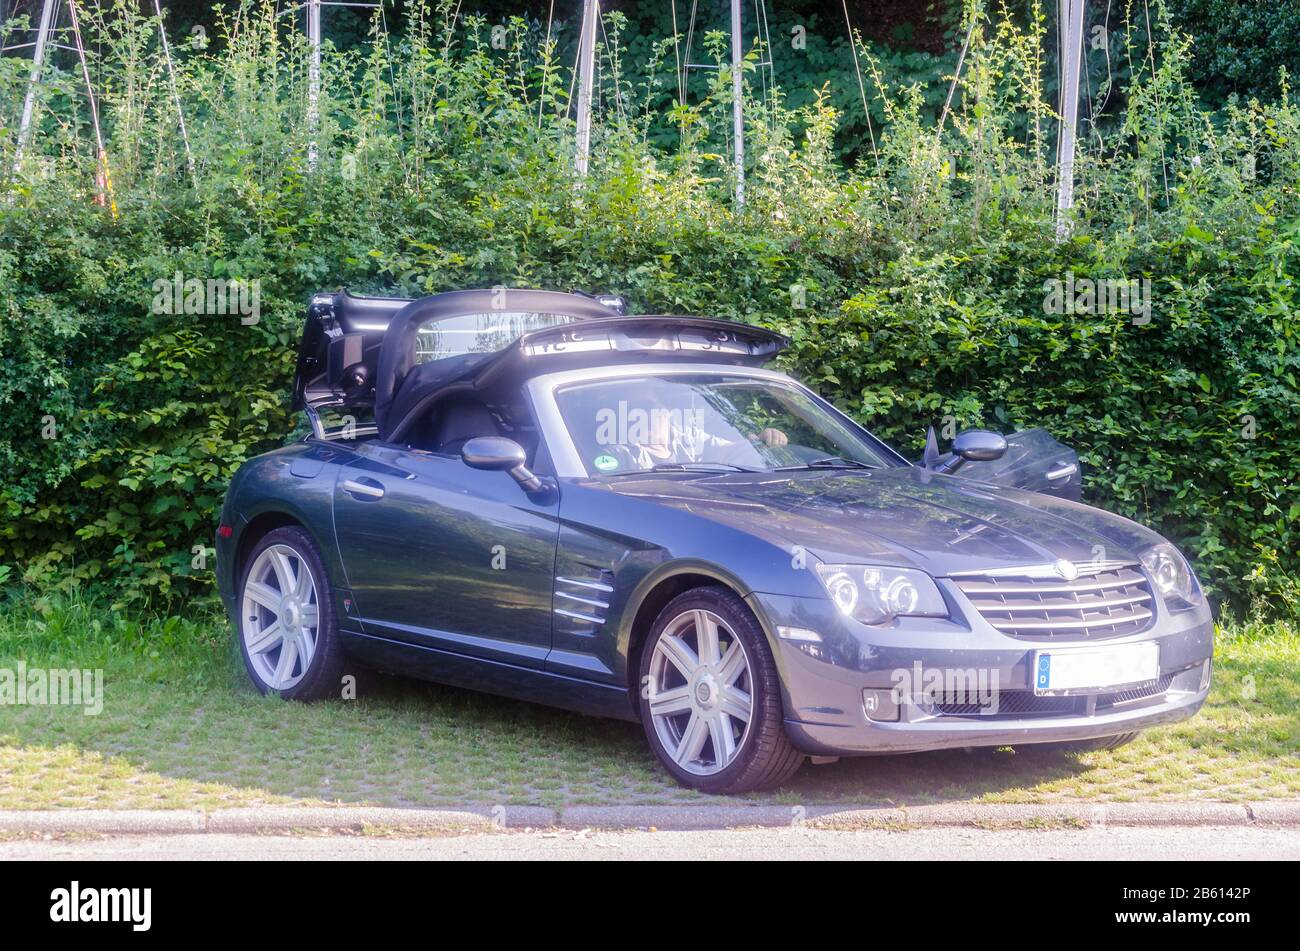 Heiligenhaus, Nrw, Germany - July 31, 2014: A male driver in a Chrysler Crossfire Roadster / Convertible in automatic machine gray, open the soft top Stock Photo